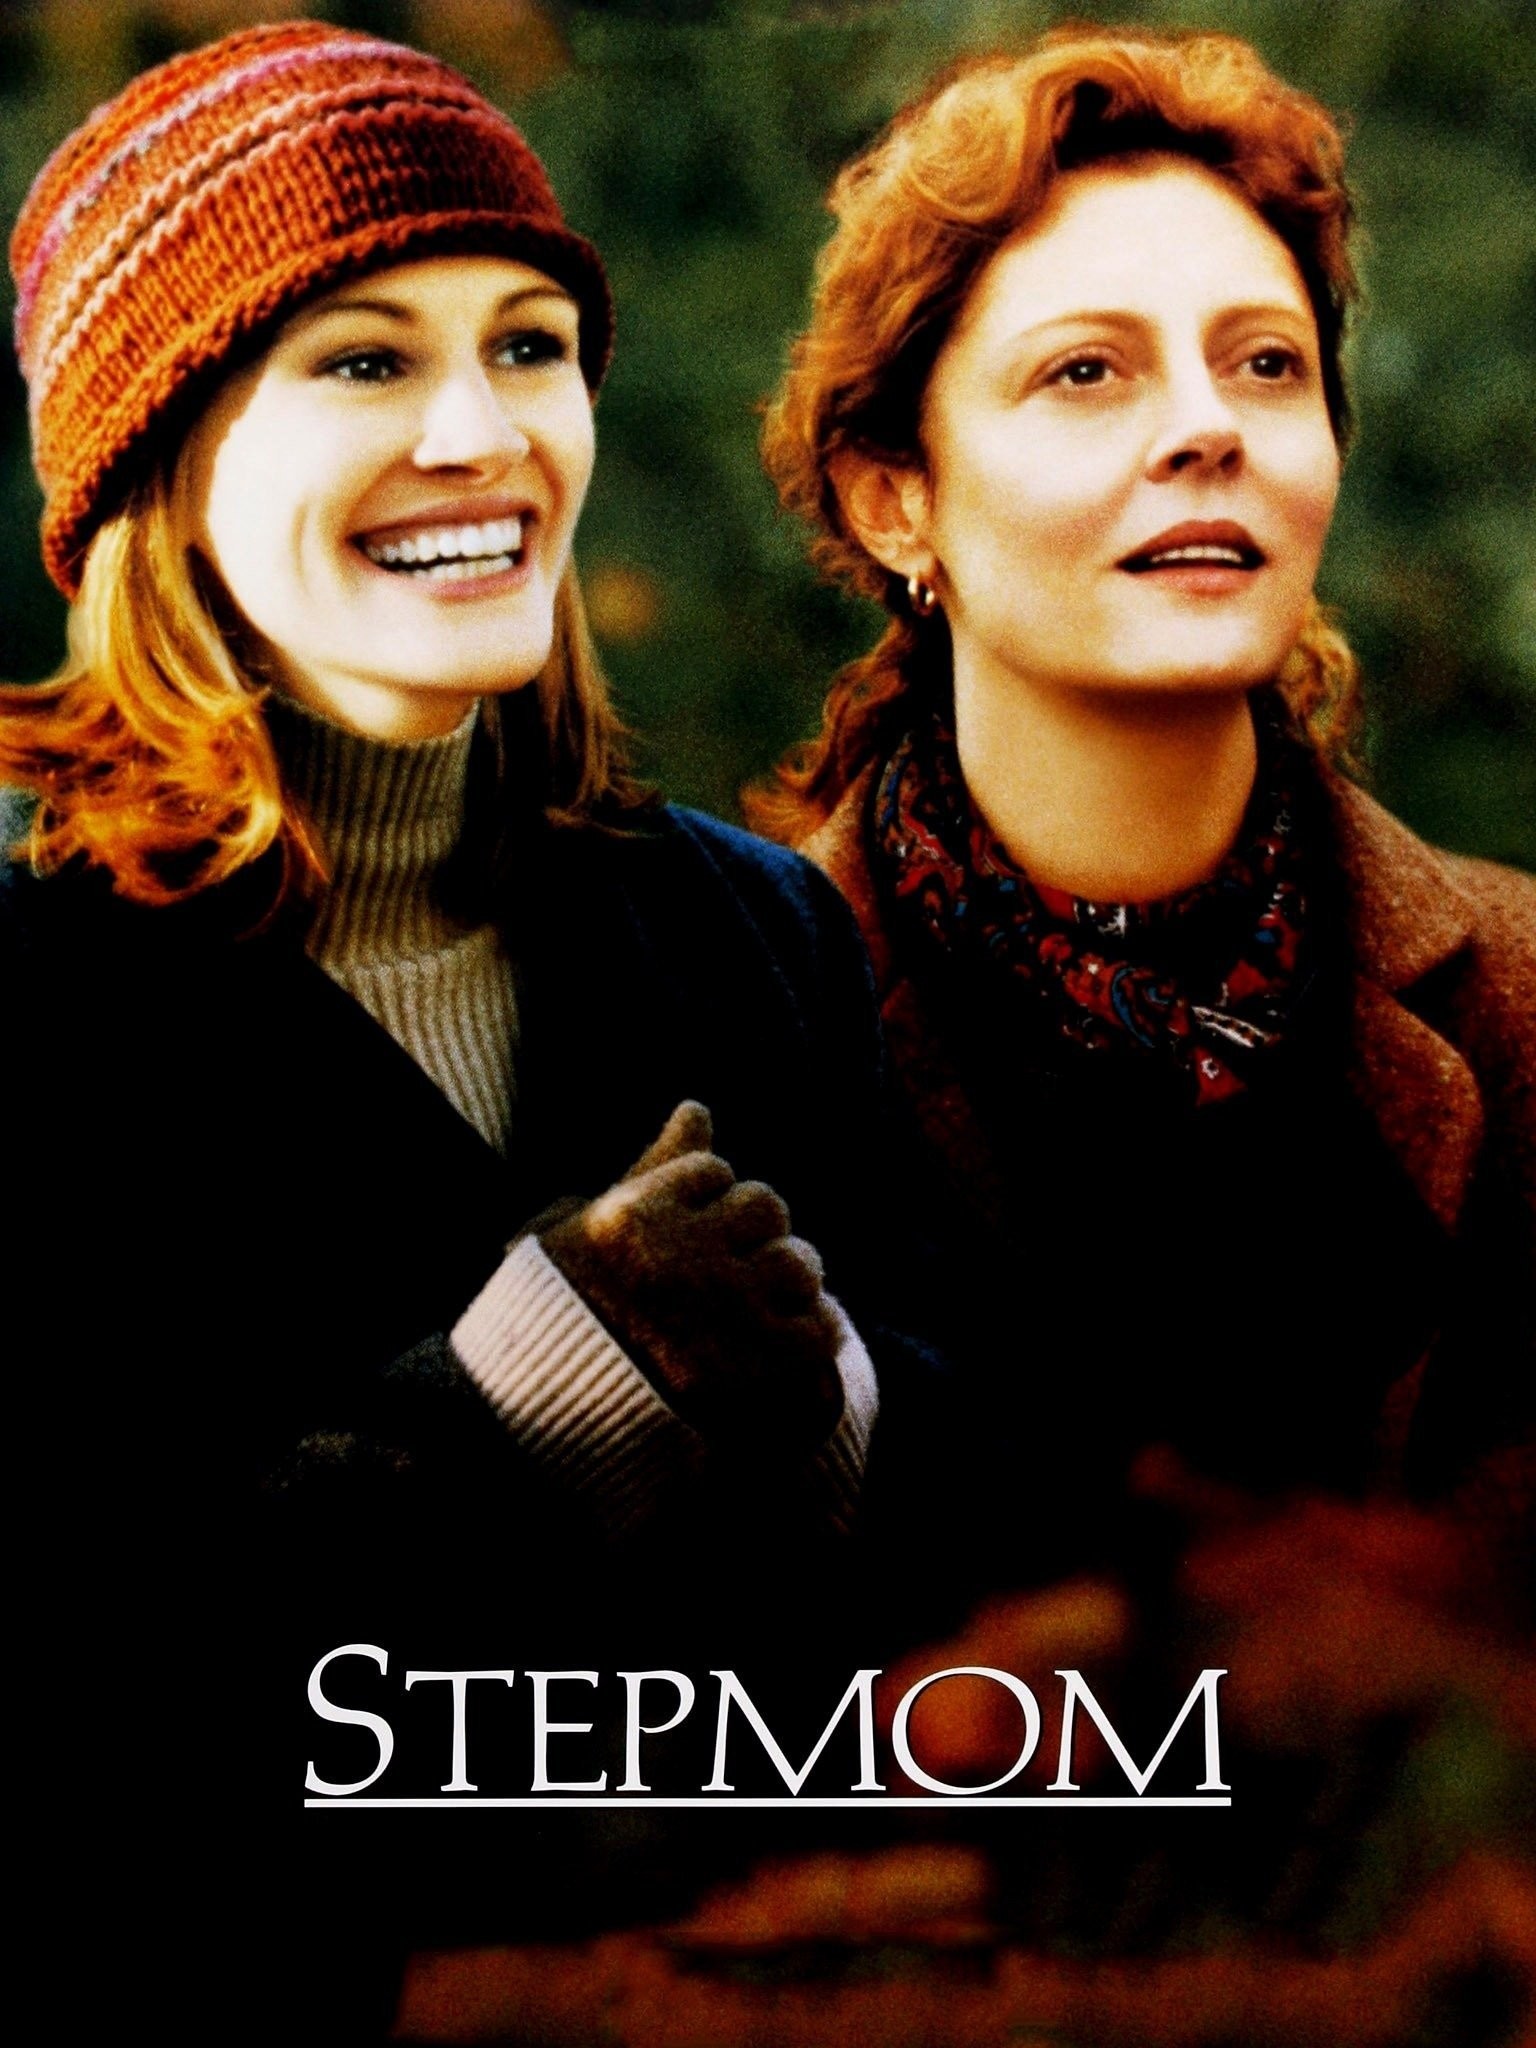 Stepmom Force Daughter For Sex - Stepmom | Rotten Tomatoes